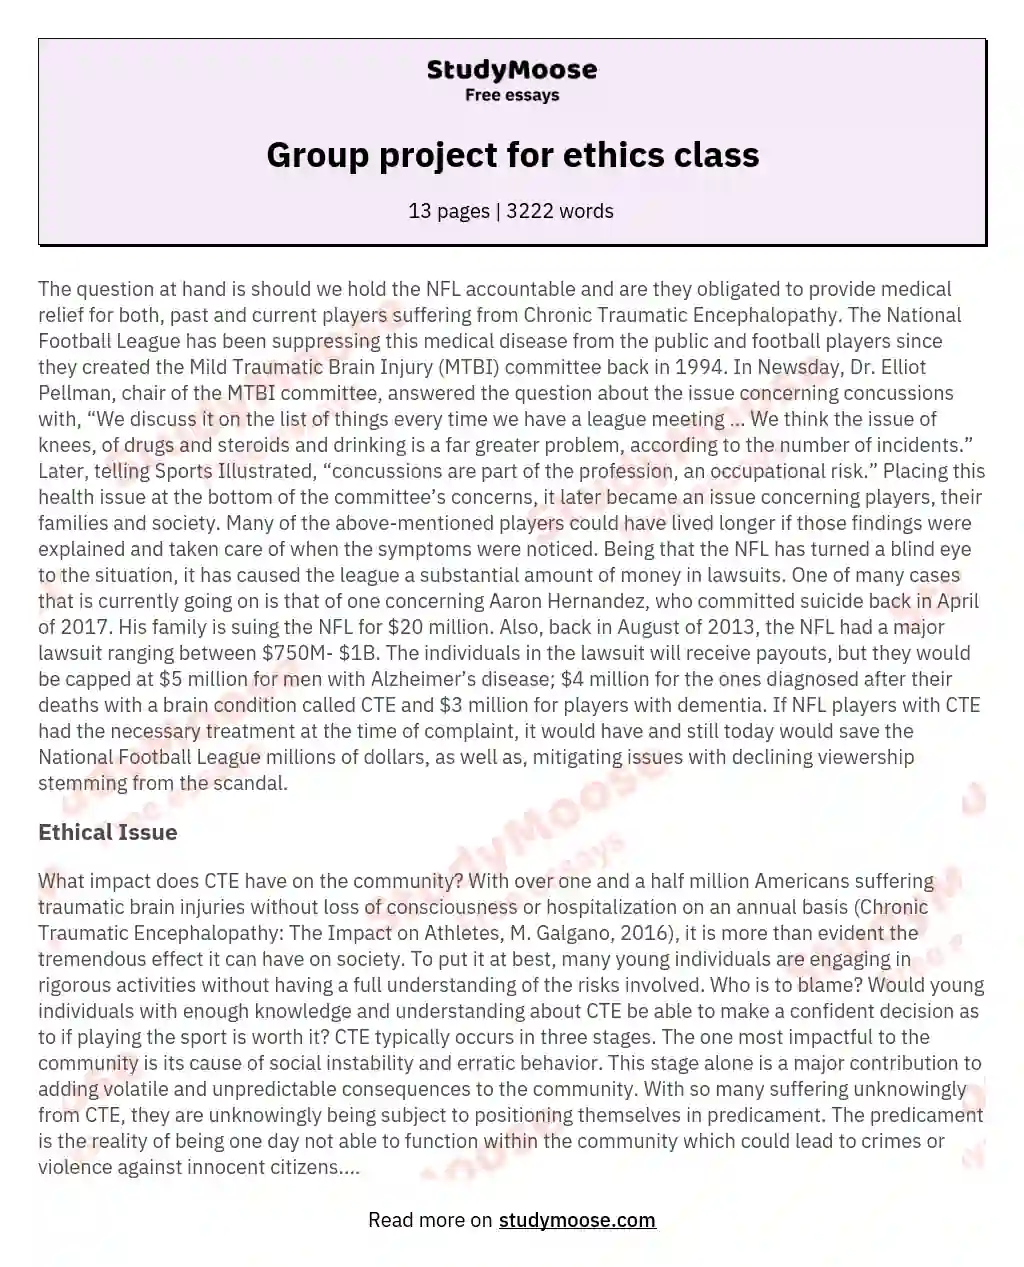 Group project for ethics class essay